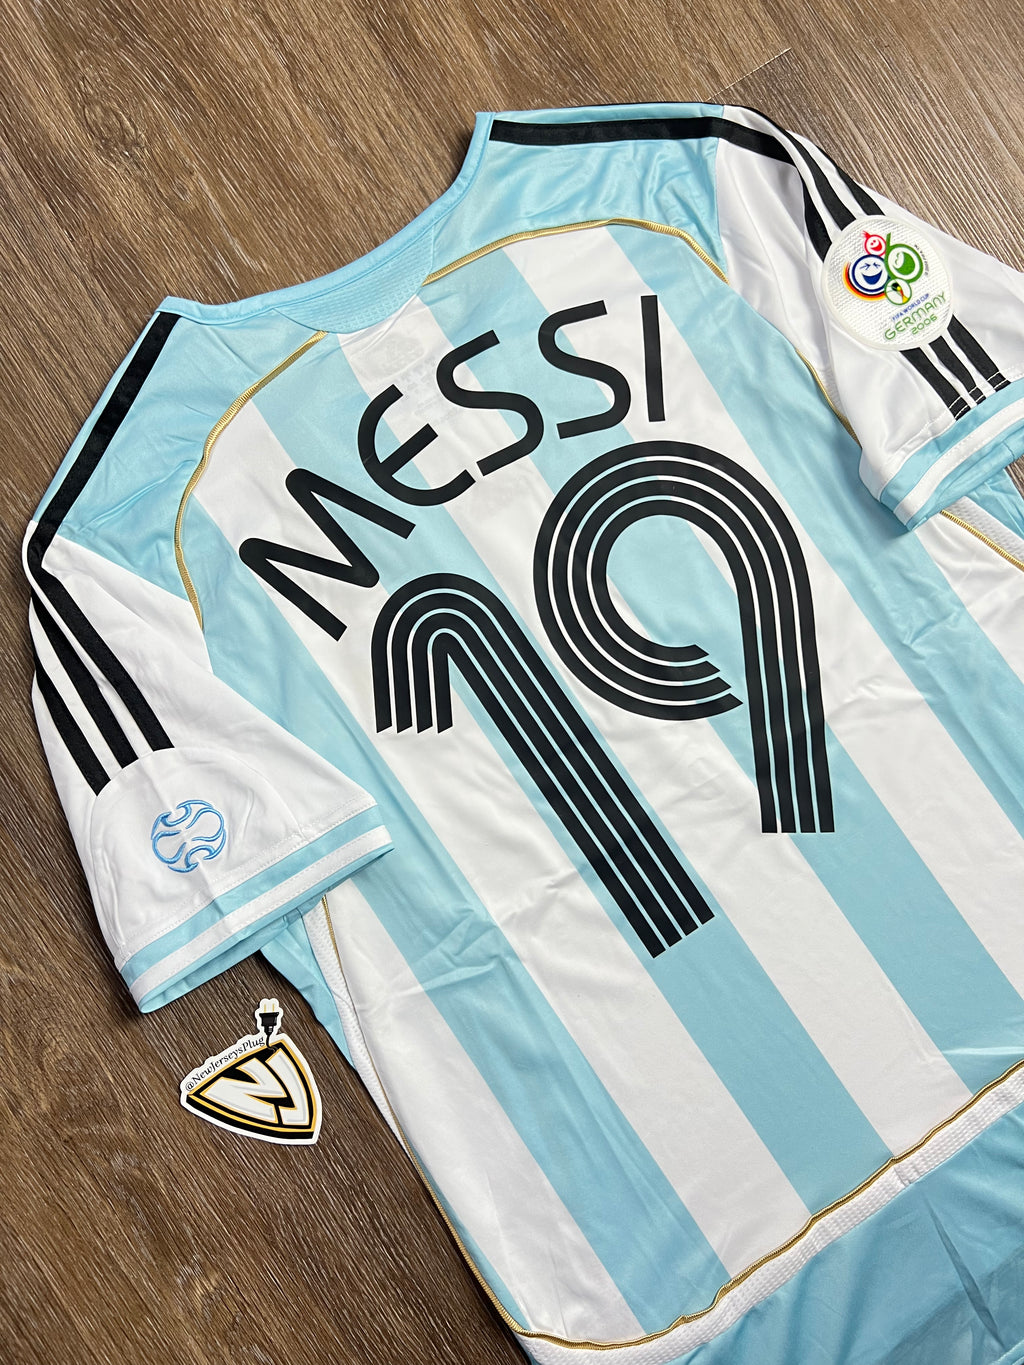 2006 Argentina Lionel Messi Home Jersey